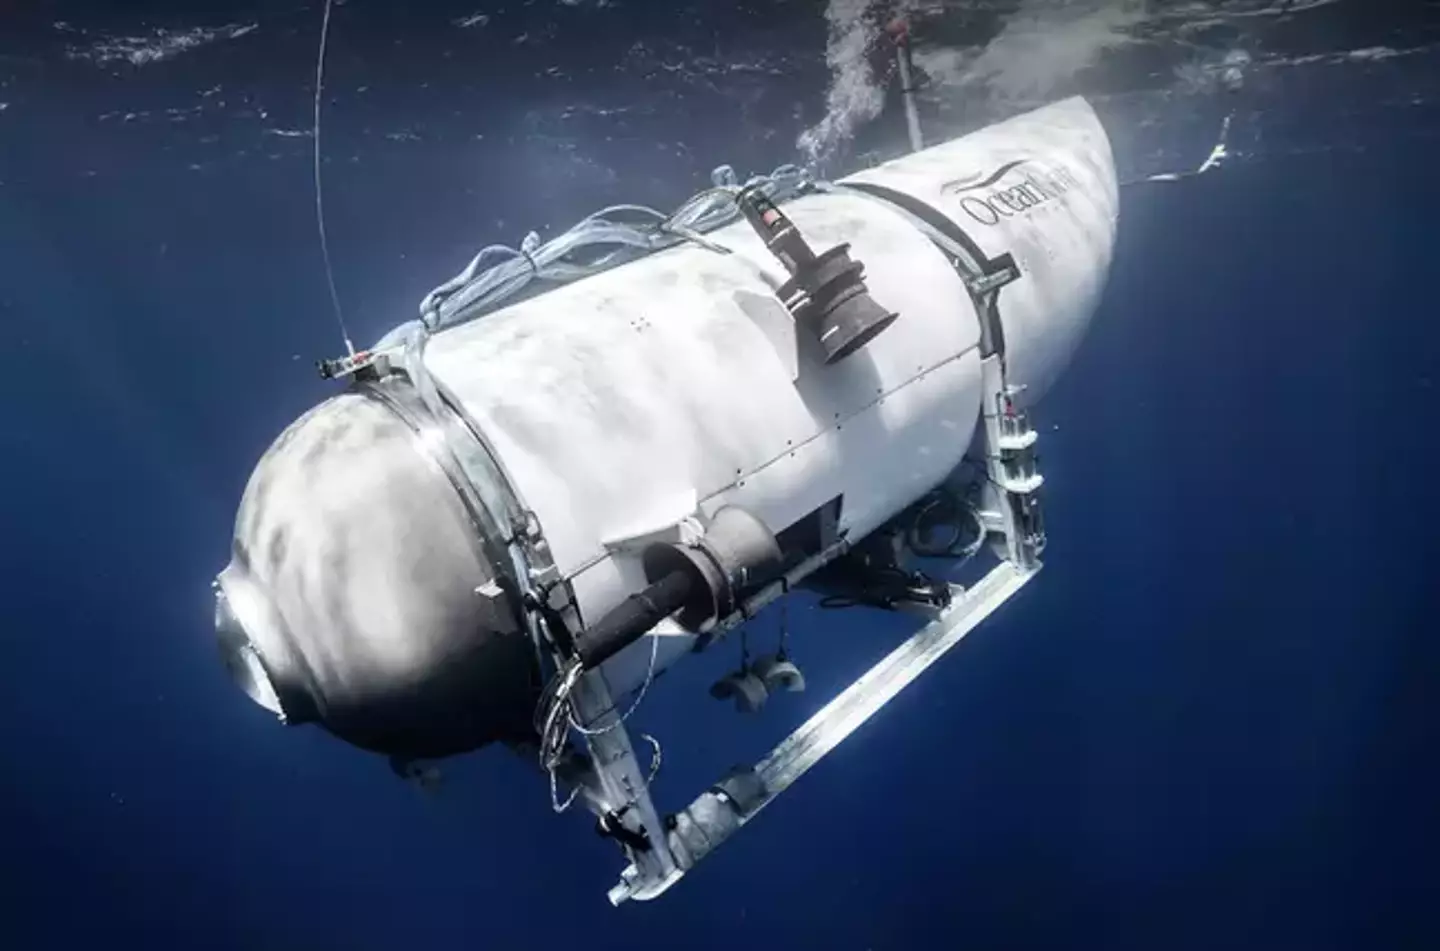 The OceanGate submersible Titan suffered a 'catastrophic implosion', killing all on board.